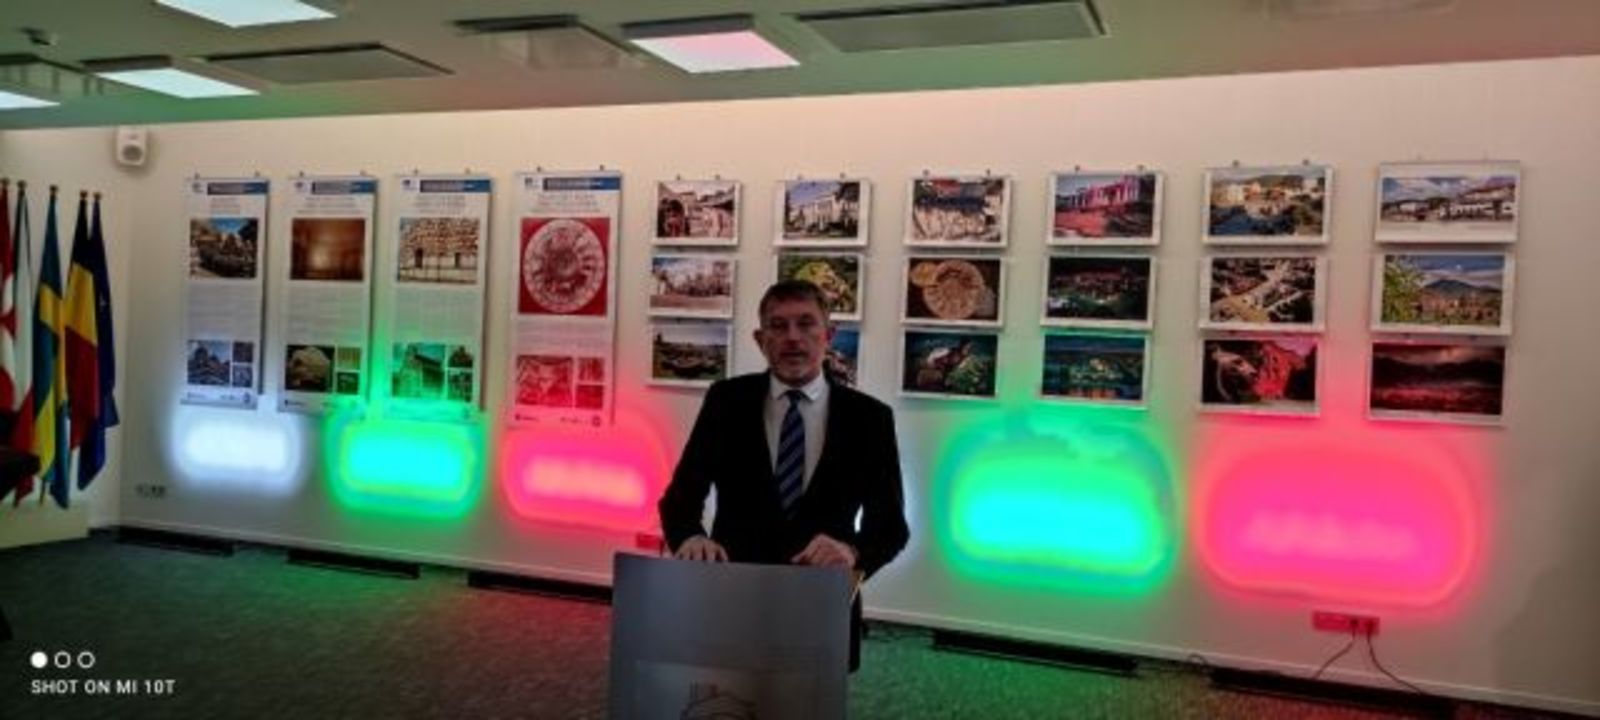 Celebrating the 100th Anniversary of the Establishment of Diplomatic Relations with Estonia with the Exhibition "Bulgarian Cities - Antiquity that Lives"